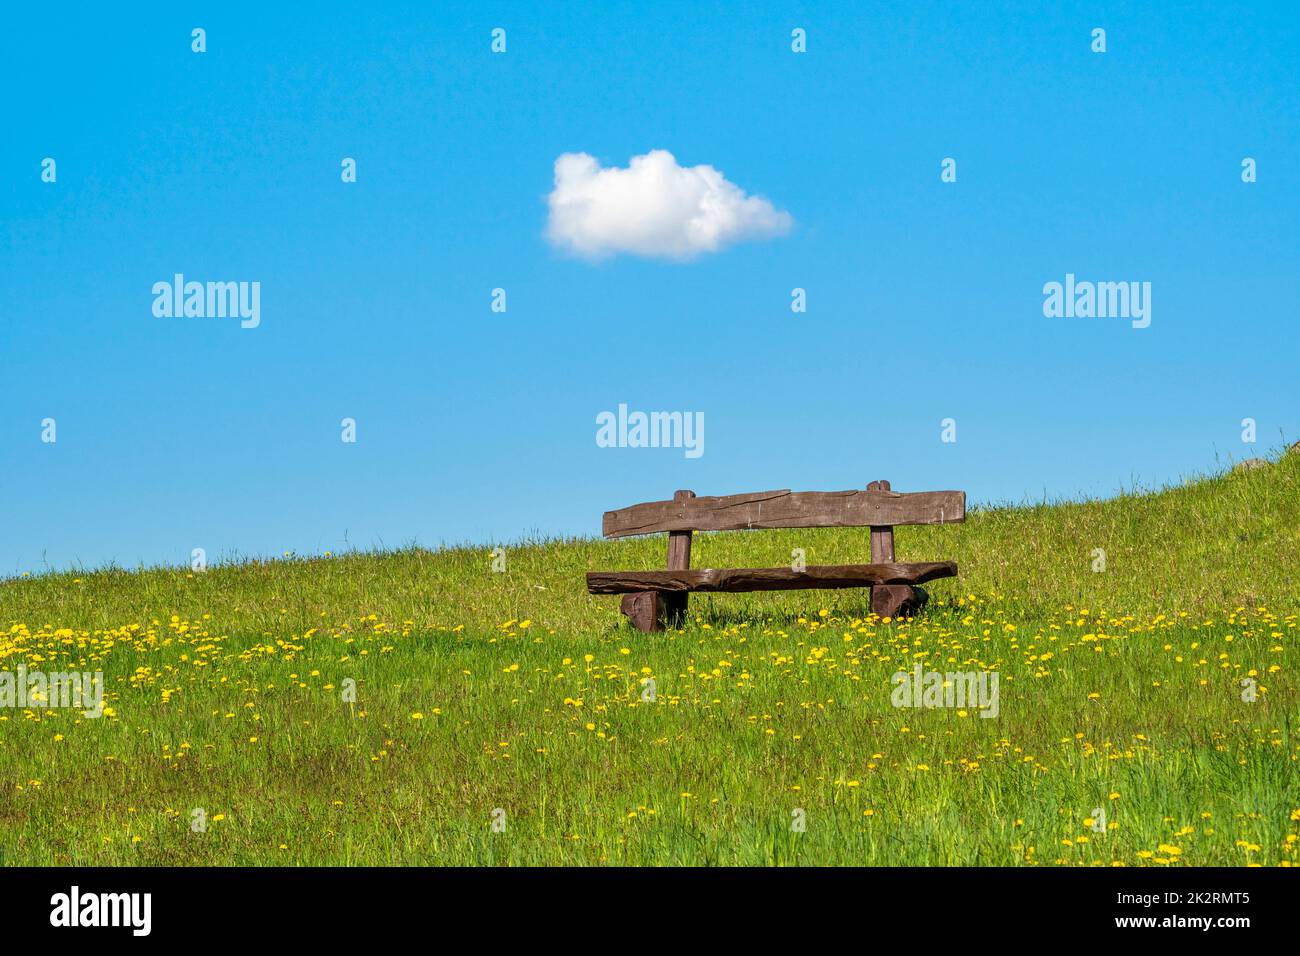 Bench on a meadow with a single cloud in a sky Stock Photo